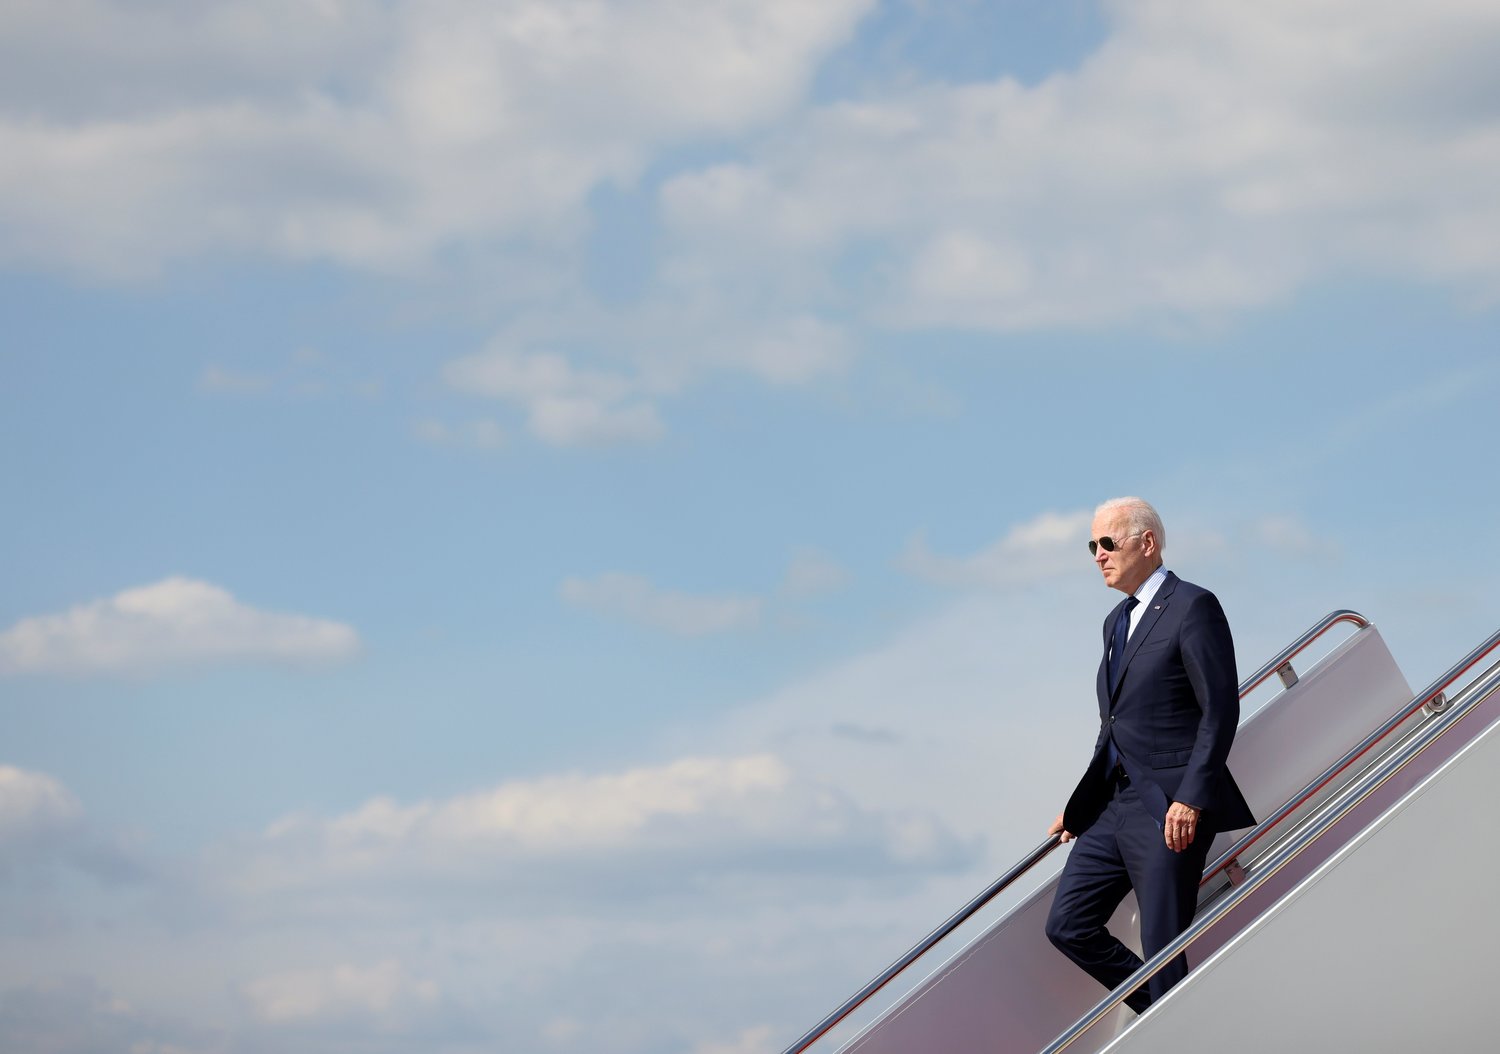 President Joe Biden disembarks from Air Force One after landing at Joint Base Andrews, Md., May 27, 2021. "Biden had long been a defender of the Hyde Amendment during his tenure in the Senate and even as a Vice Presidential candidate. But the President caved to the attacks of the progressive left, revealing that immediate political gain means more to him than upholding a very reasonable and long-standing policy supported by most Americans."